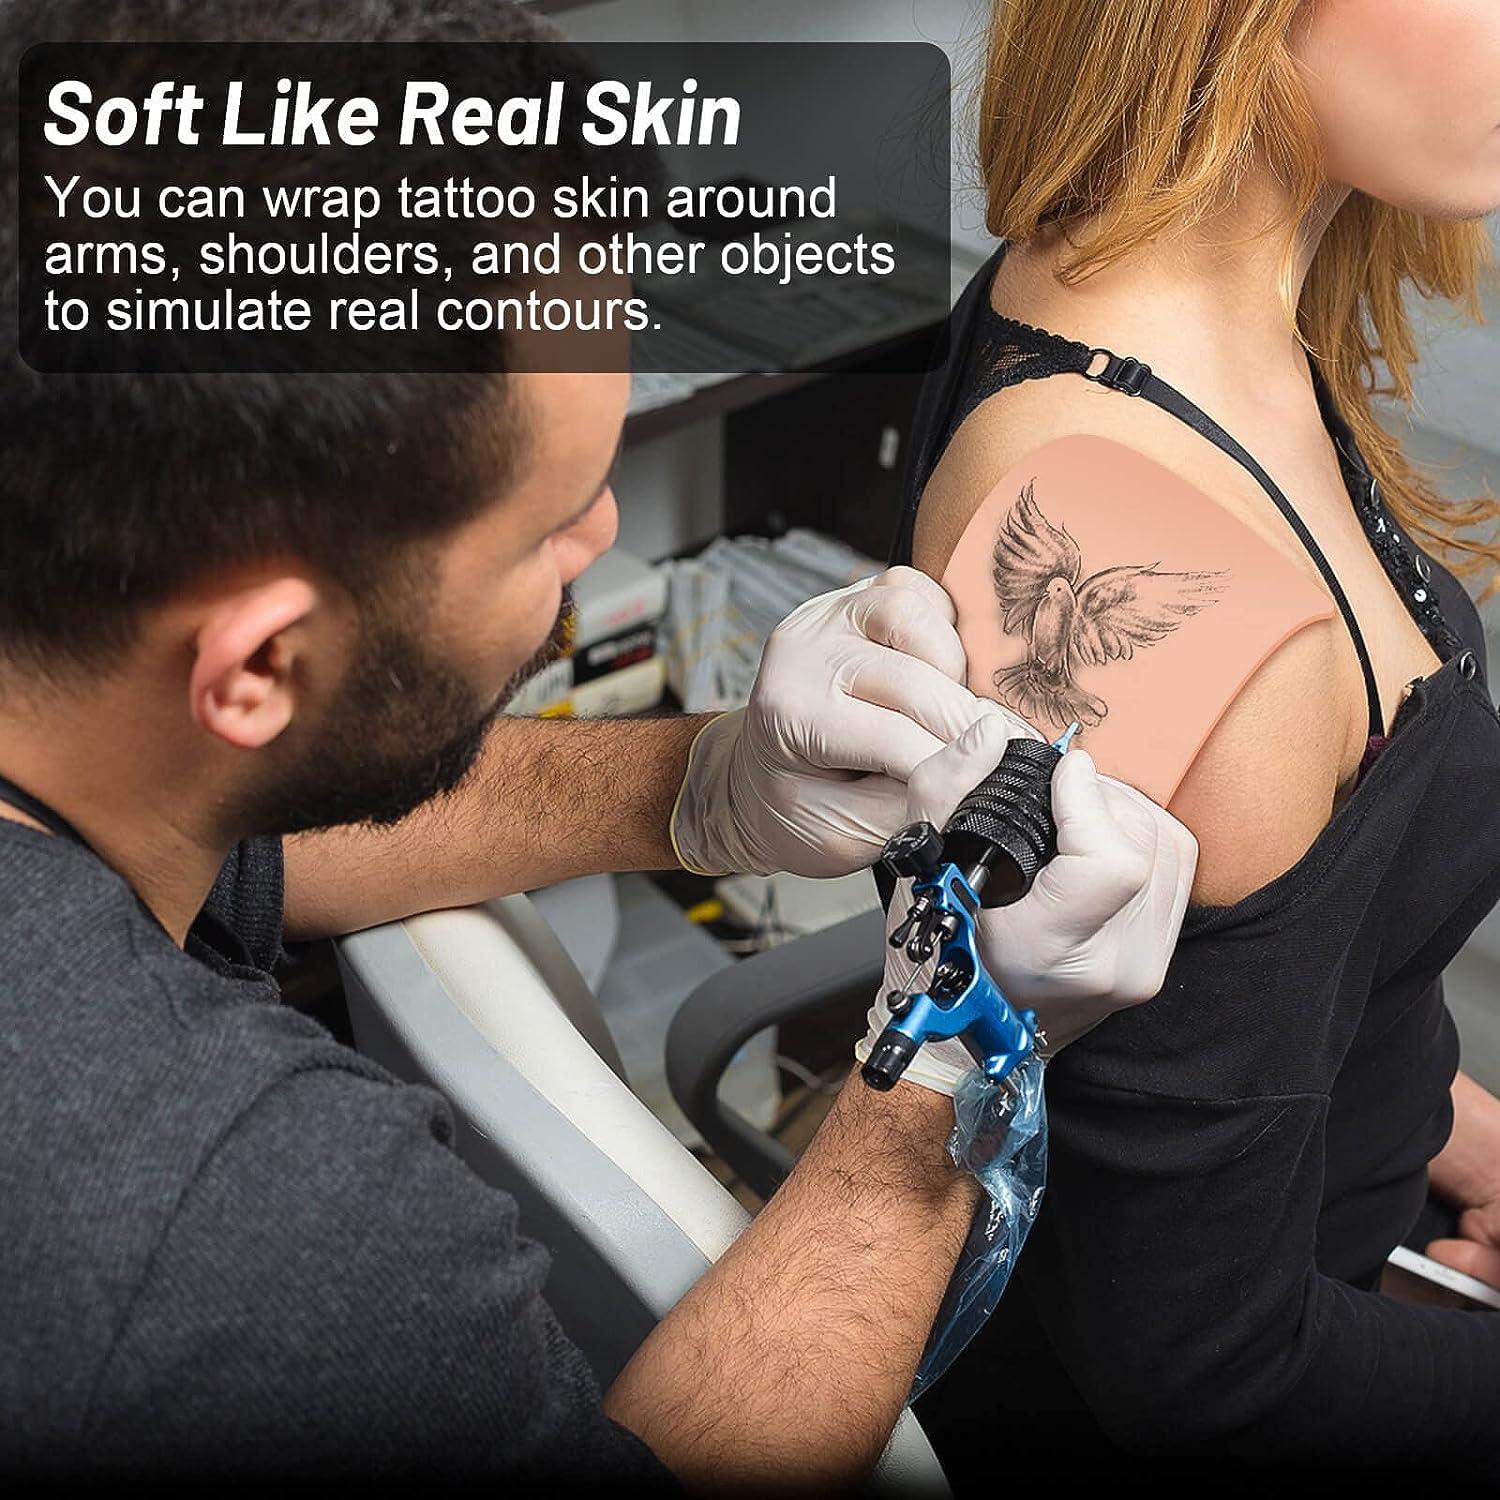 soft' in Realism Tattoos • Search in +1.3M Tattoos Now • Tattoodo